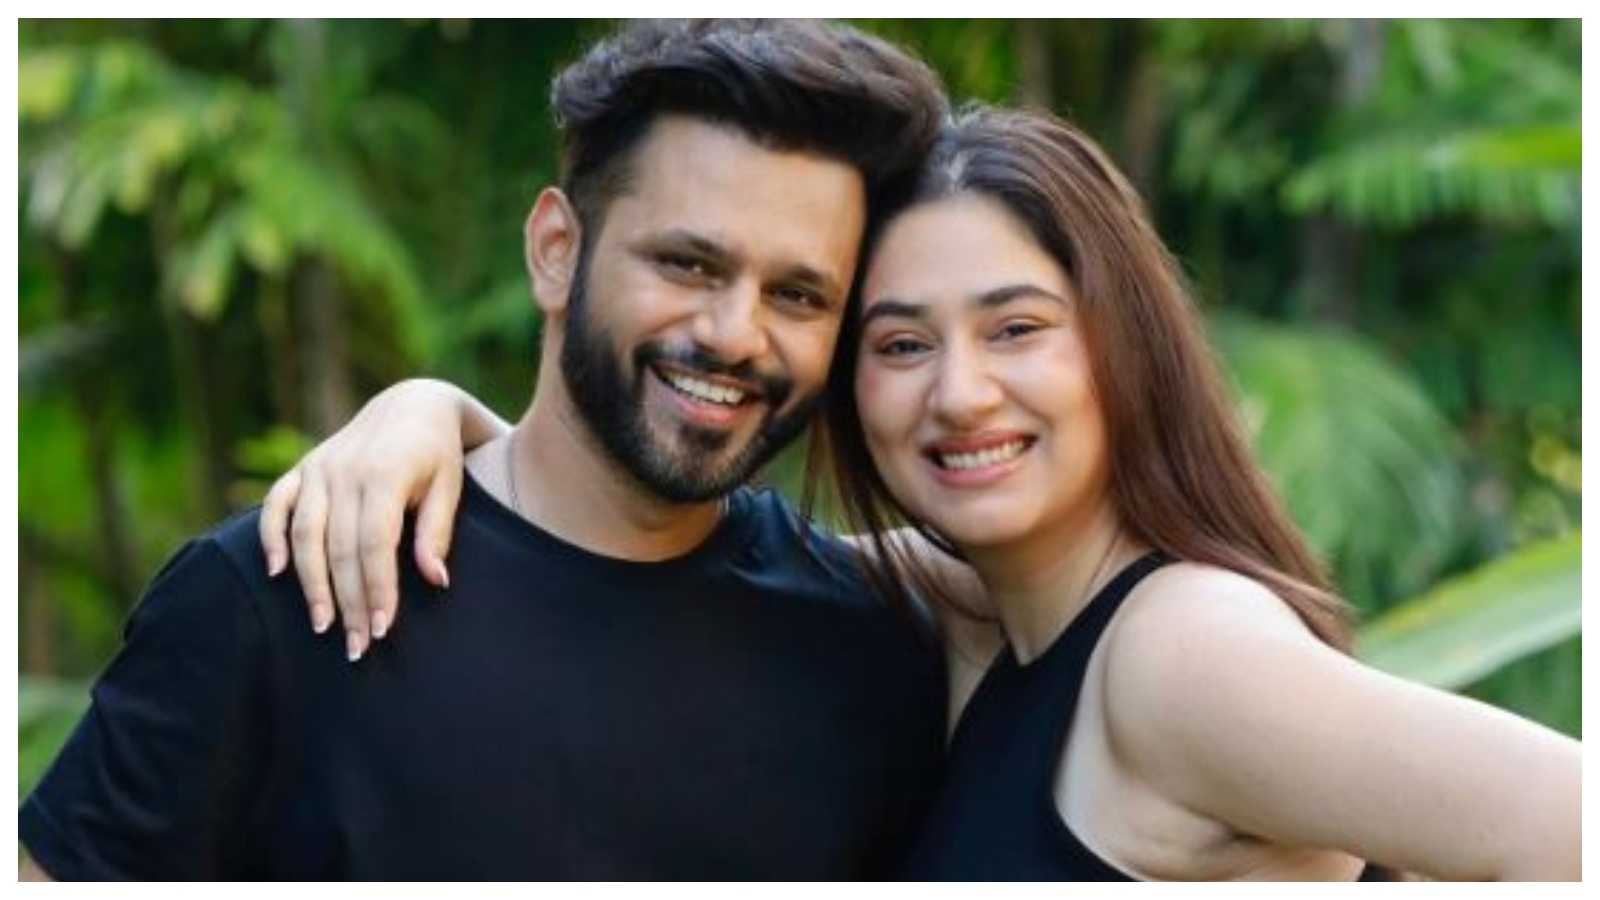 Rahul Vaidya and Disha Parmar announcing their pregnancy with sonogram visuals is the cutest thing on internet today